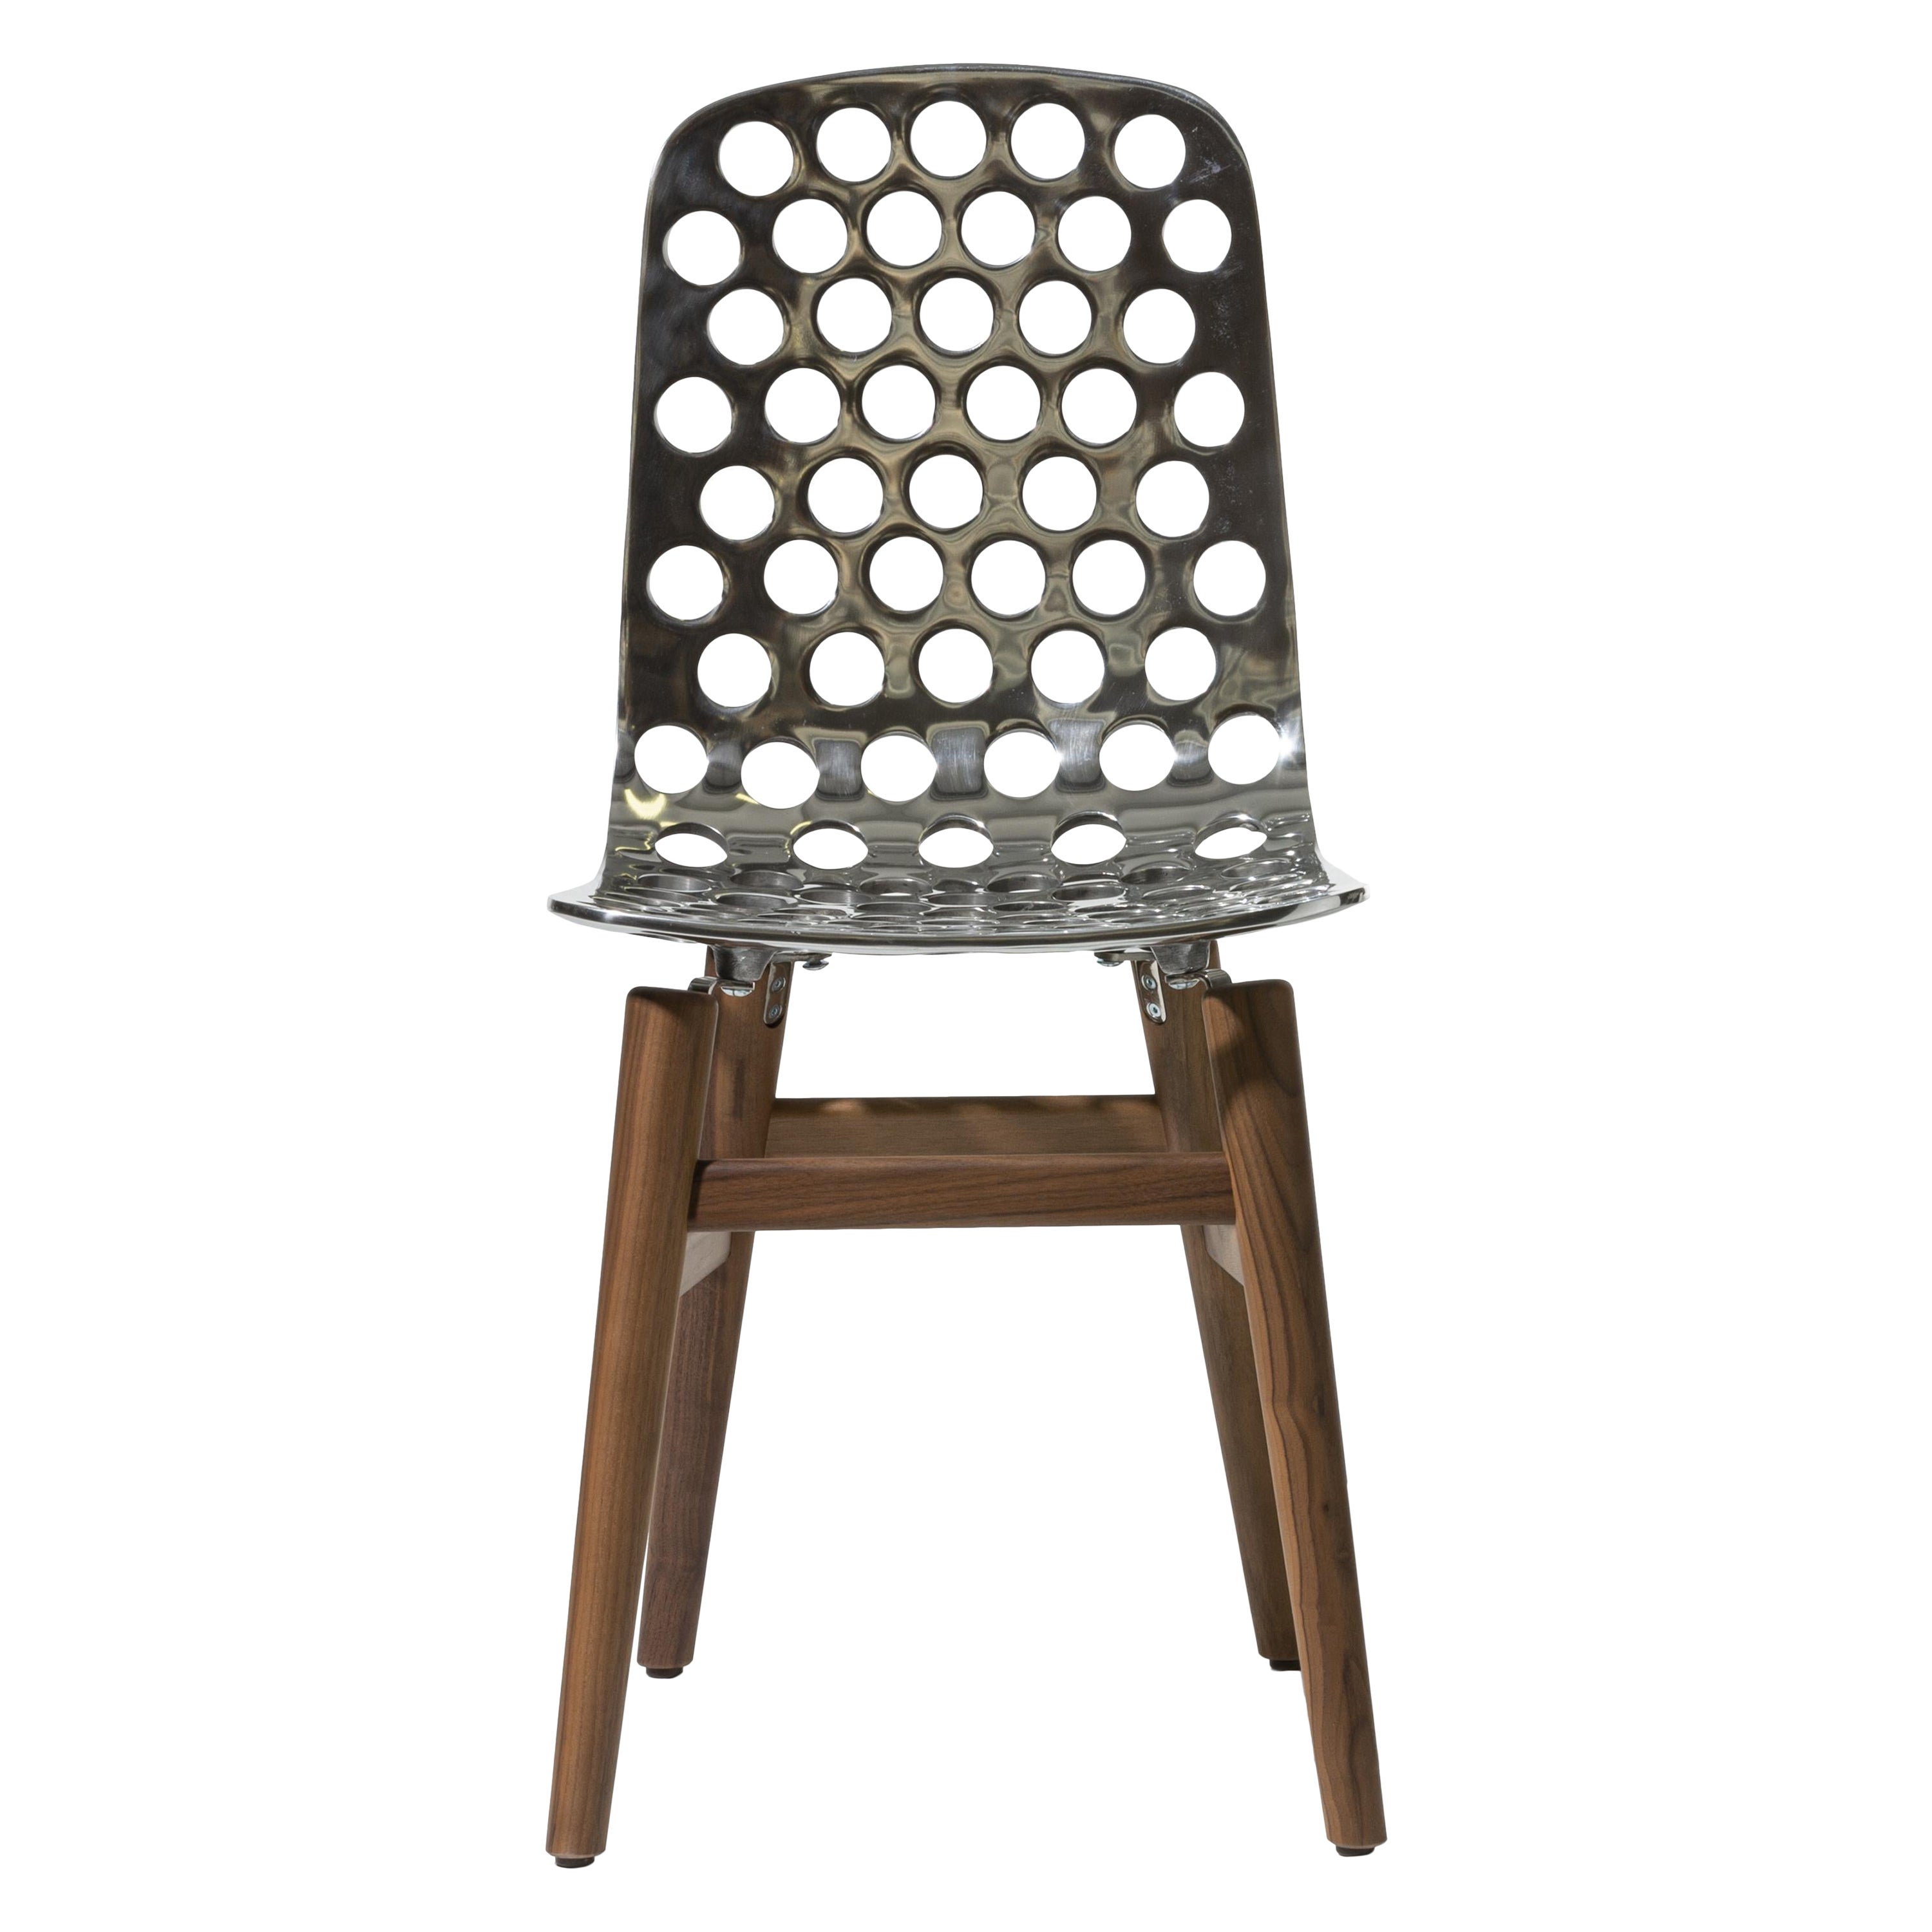 Gervasoni Next 121 Shell Cast Polished Aluminum Chair in Walnut by Paola Navone For Sale